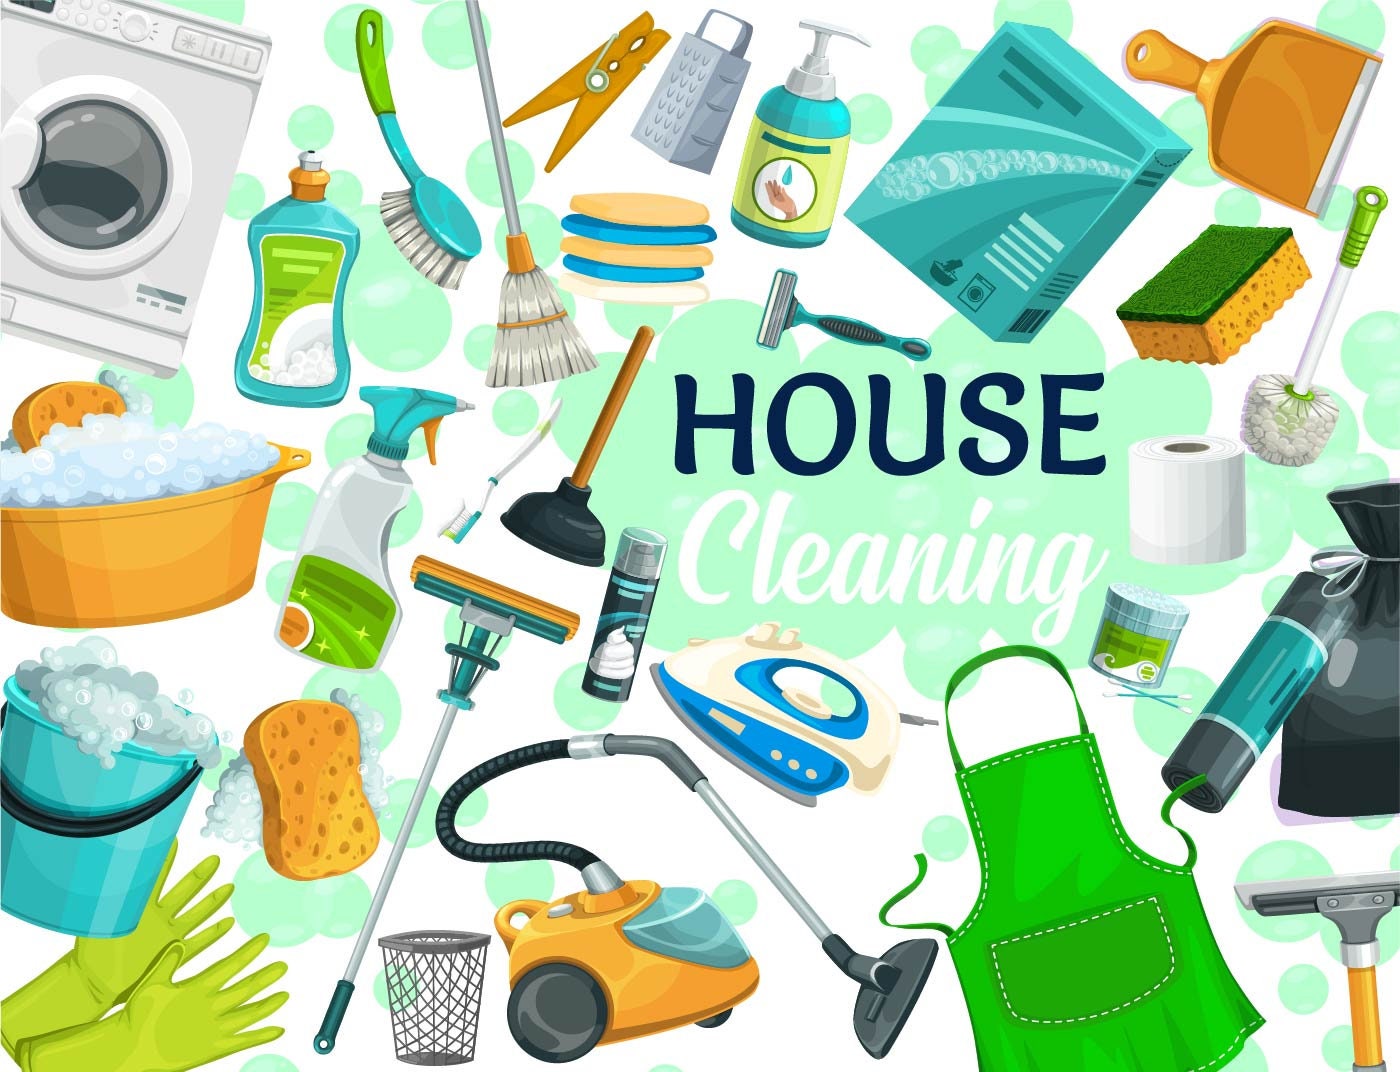 Cleaning Supplies Clipart, Cleaning clipart, house cleaning clipart,  Cleaning Supplies, Vacuum, Cleaning, Laundry, Instant Download SVG